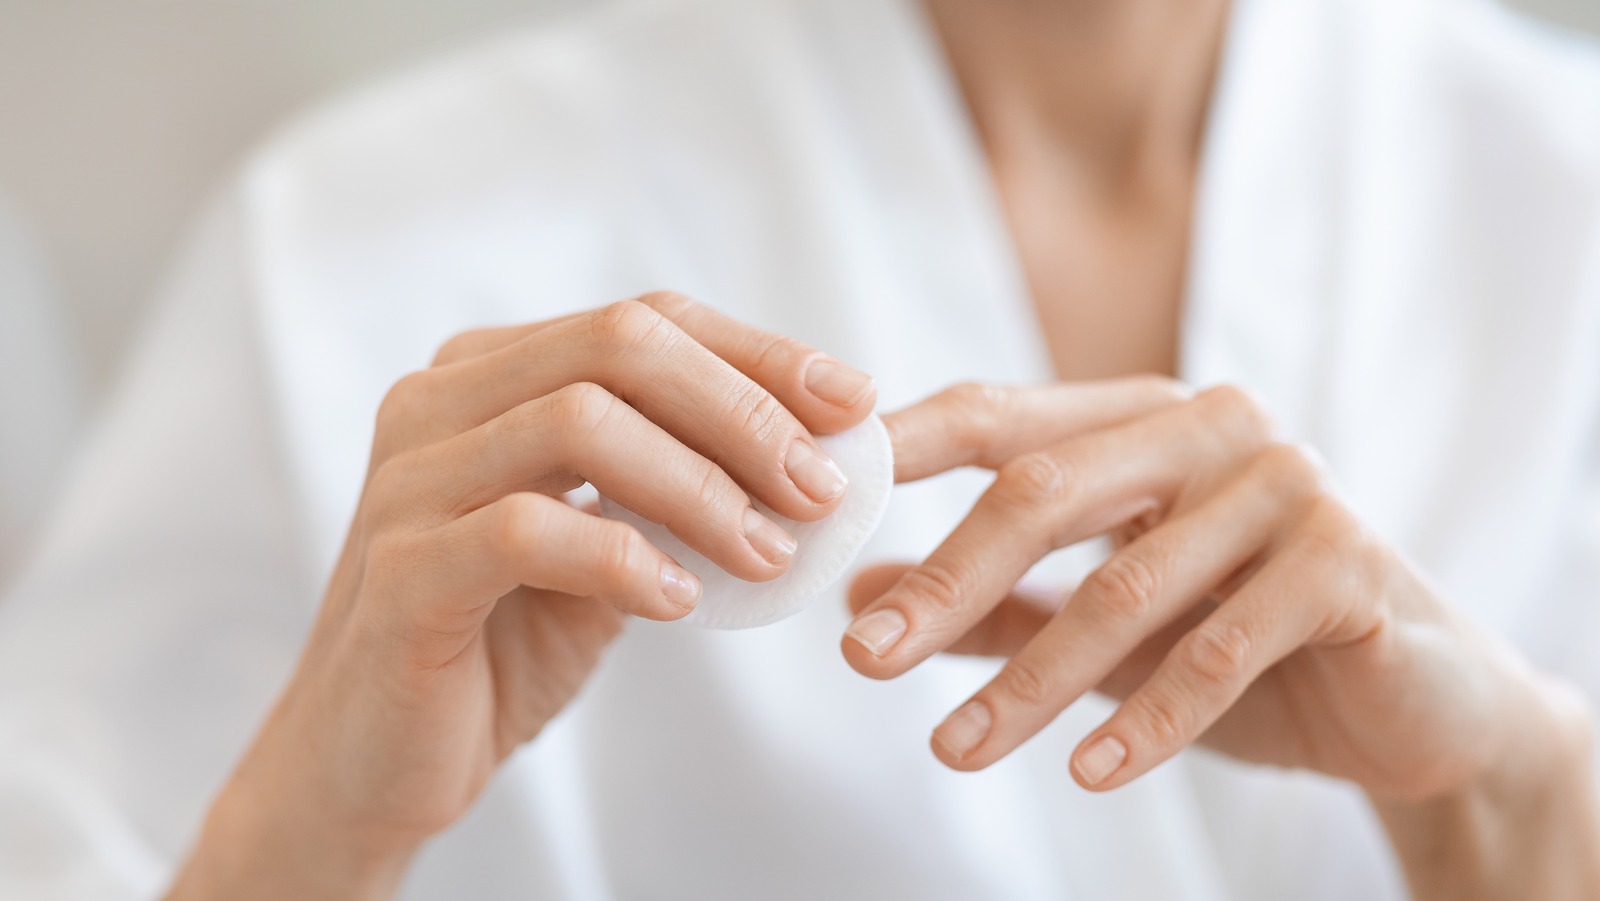 Nail Changes During Treatment | Memorial Sloan Kettering Cancer Center